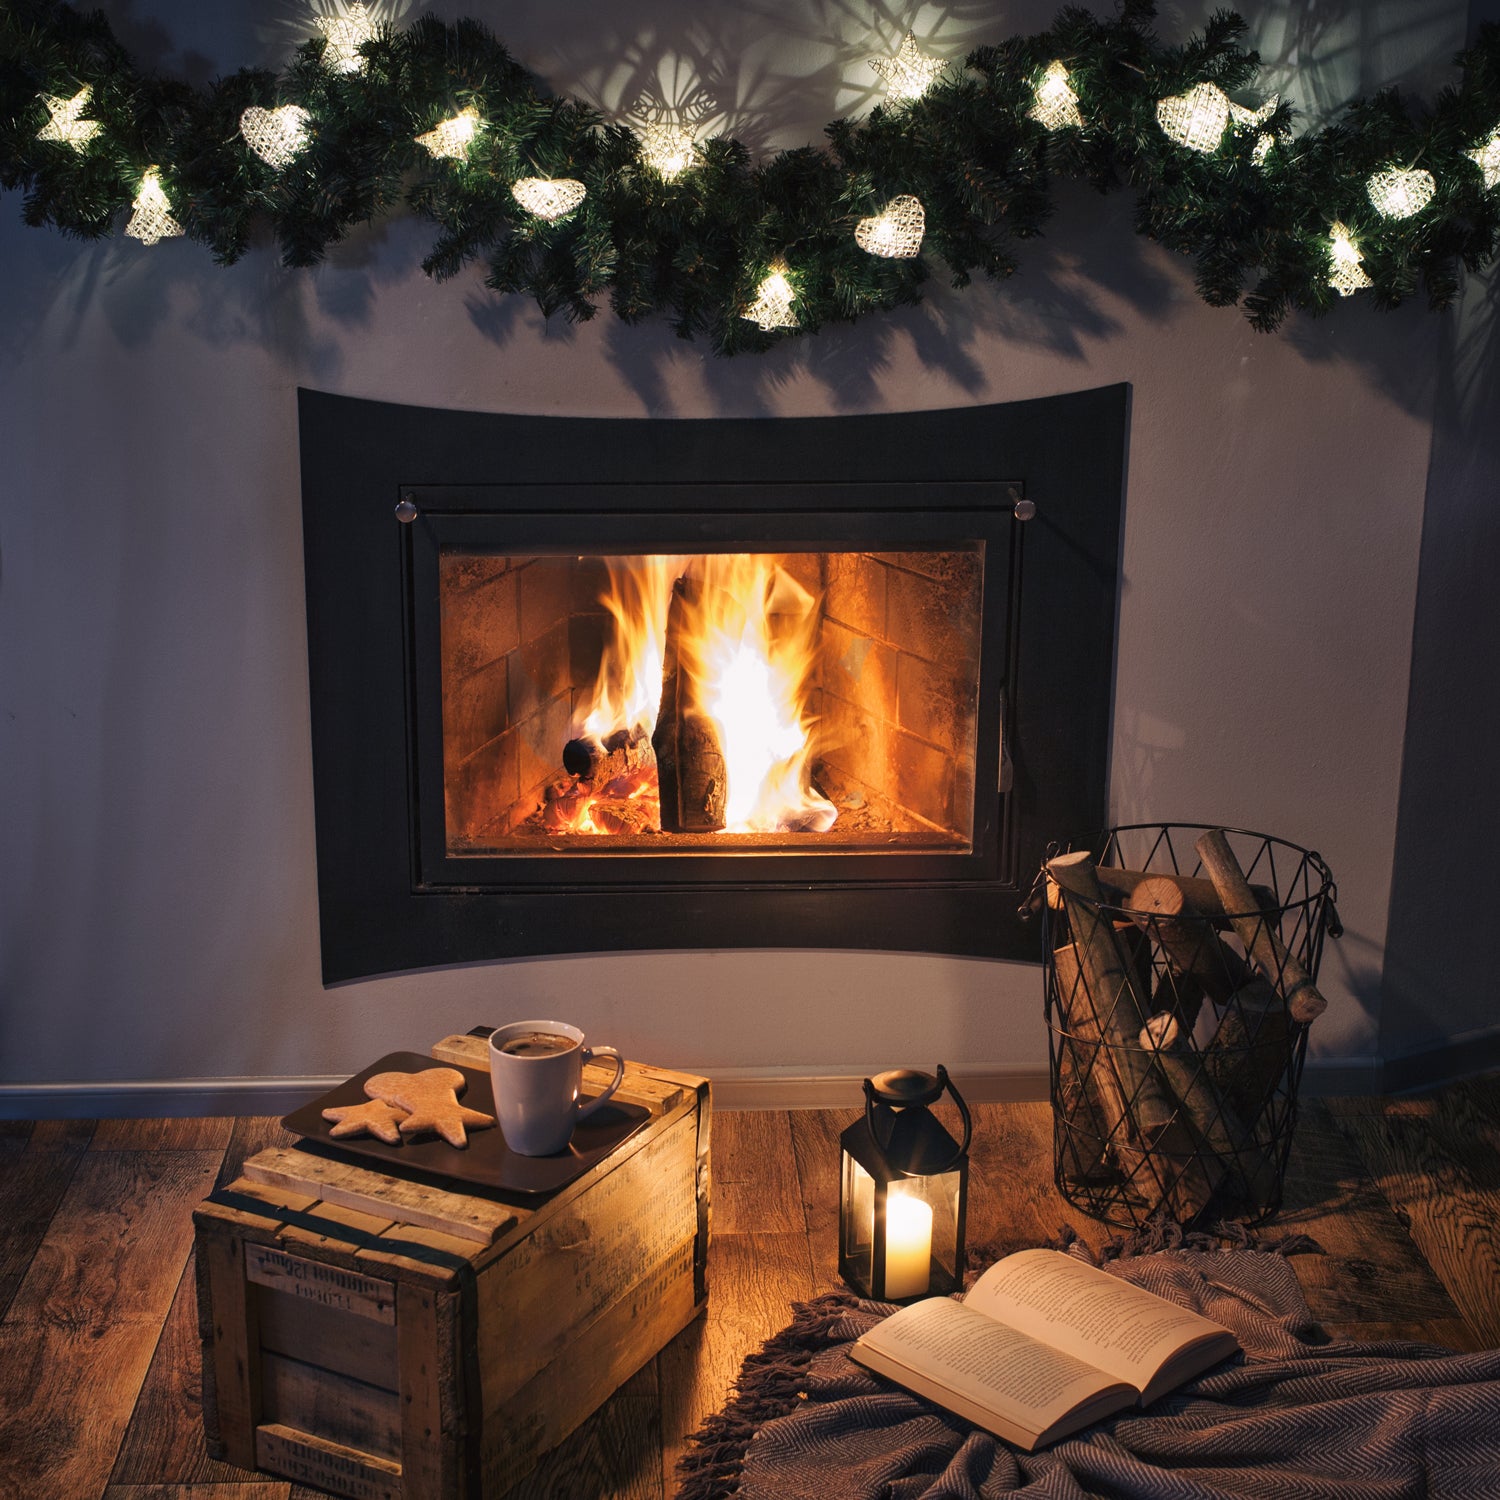 A rustic Tuscany Candle fireplace adorned with Christmas lights and a book, exuding the cozy farmhouse charm of the holiday season.